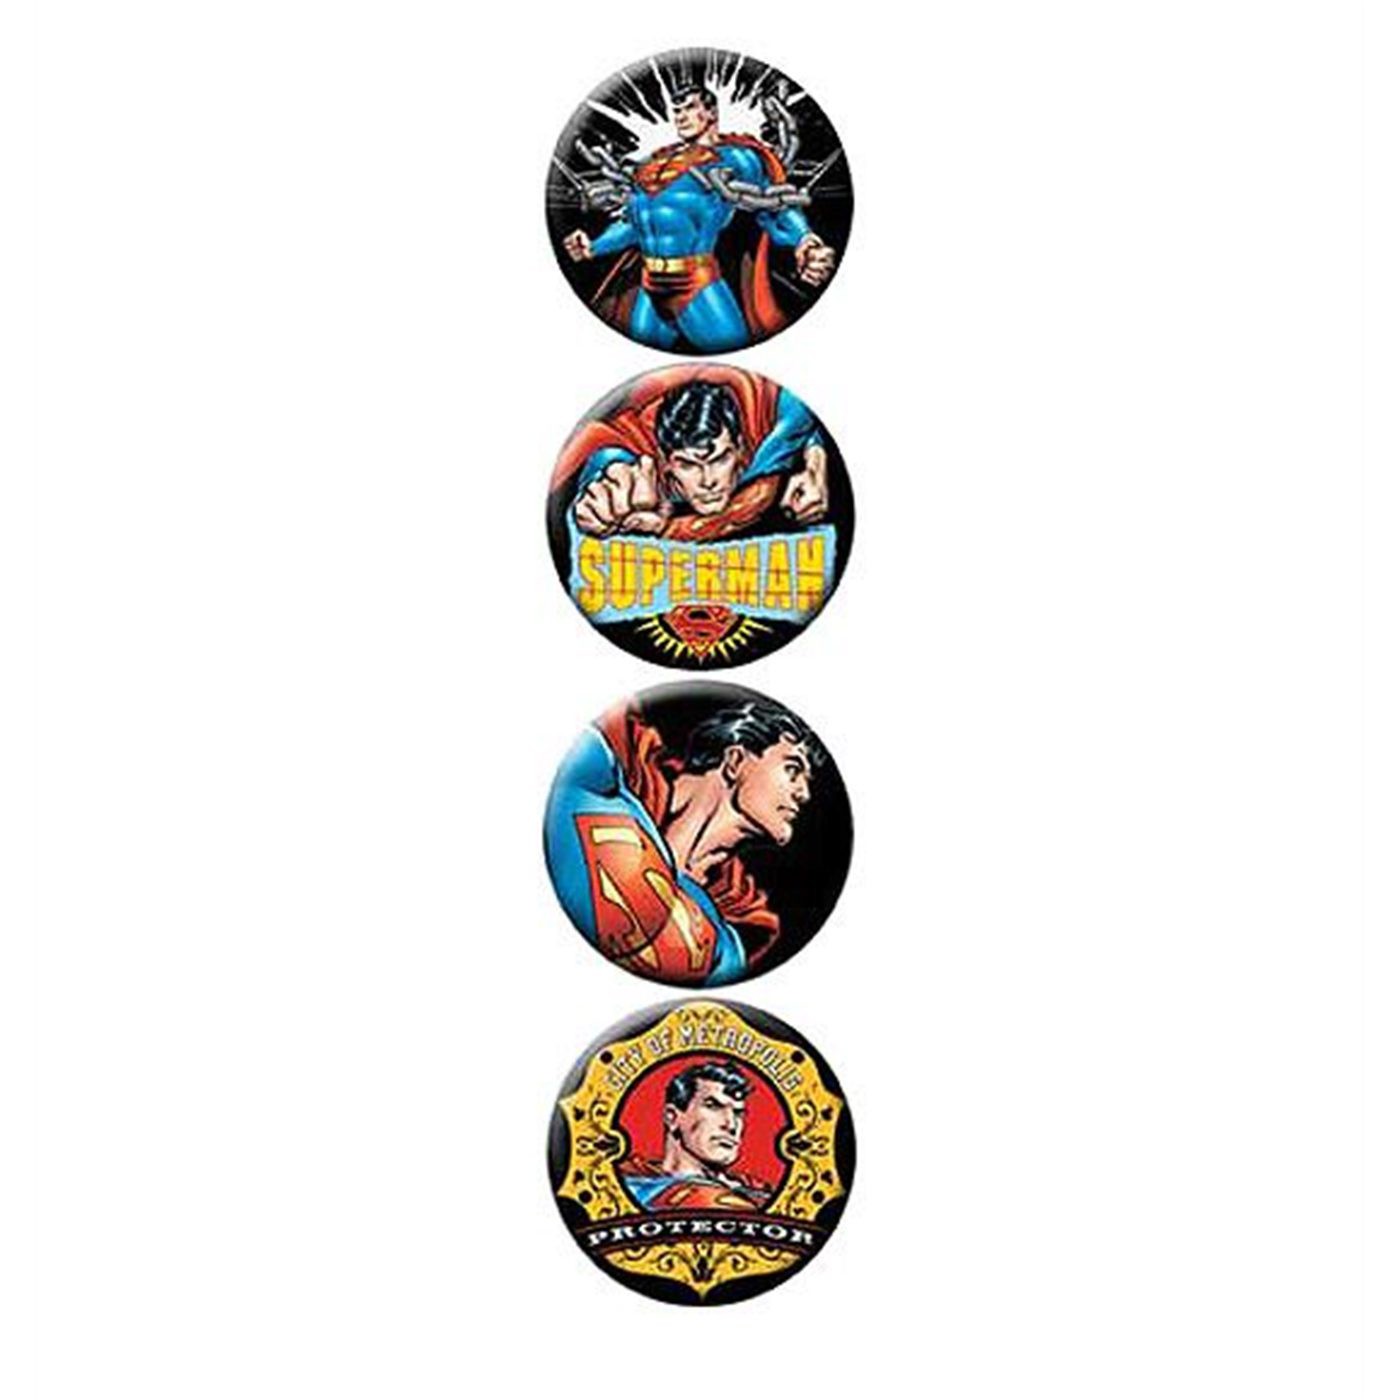 Superman Stand, Fly, and Break 4 Button Set